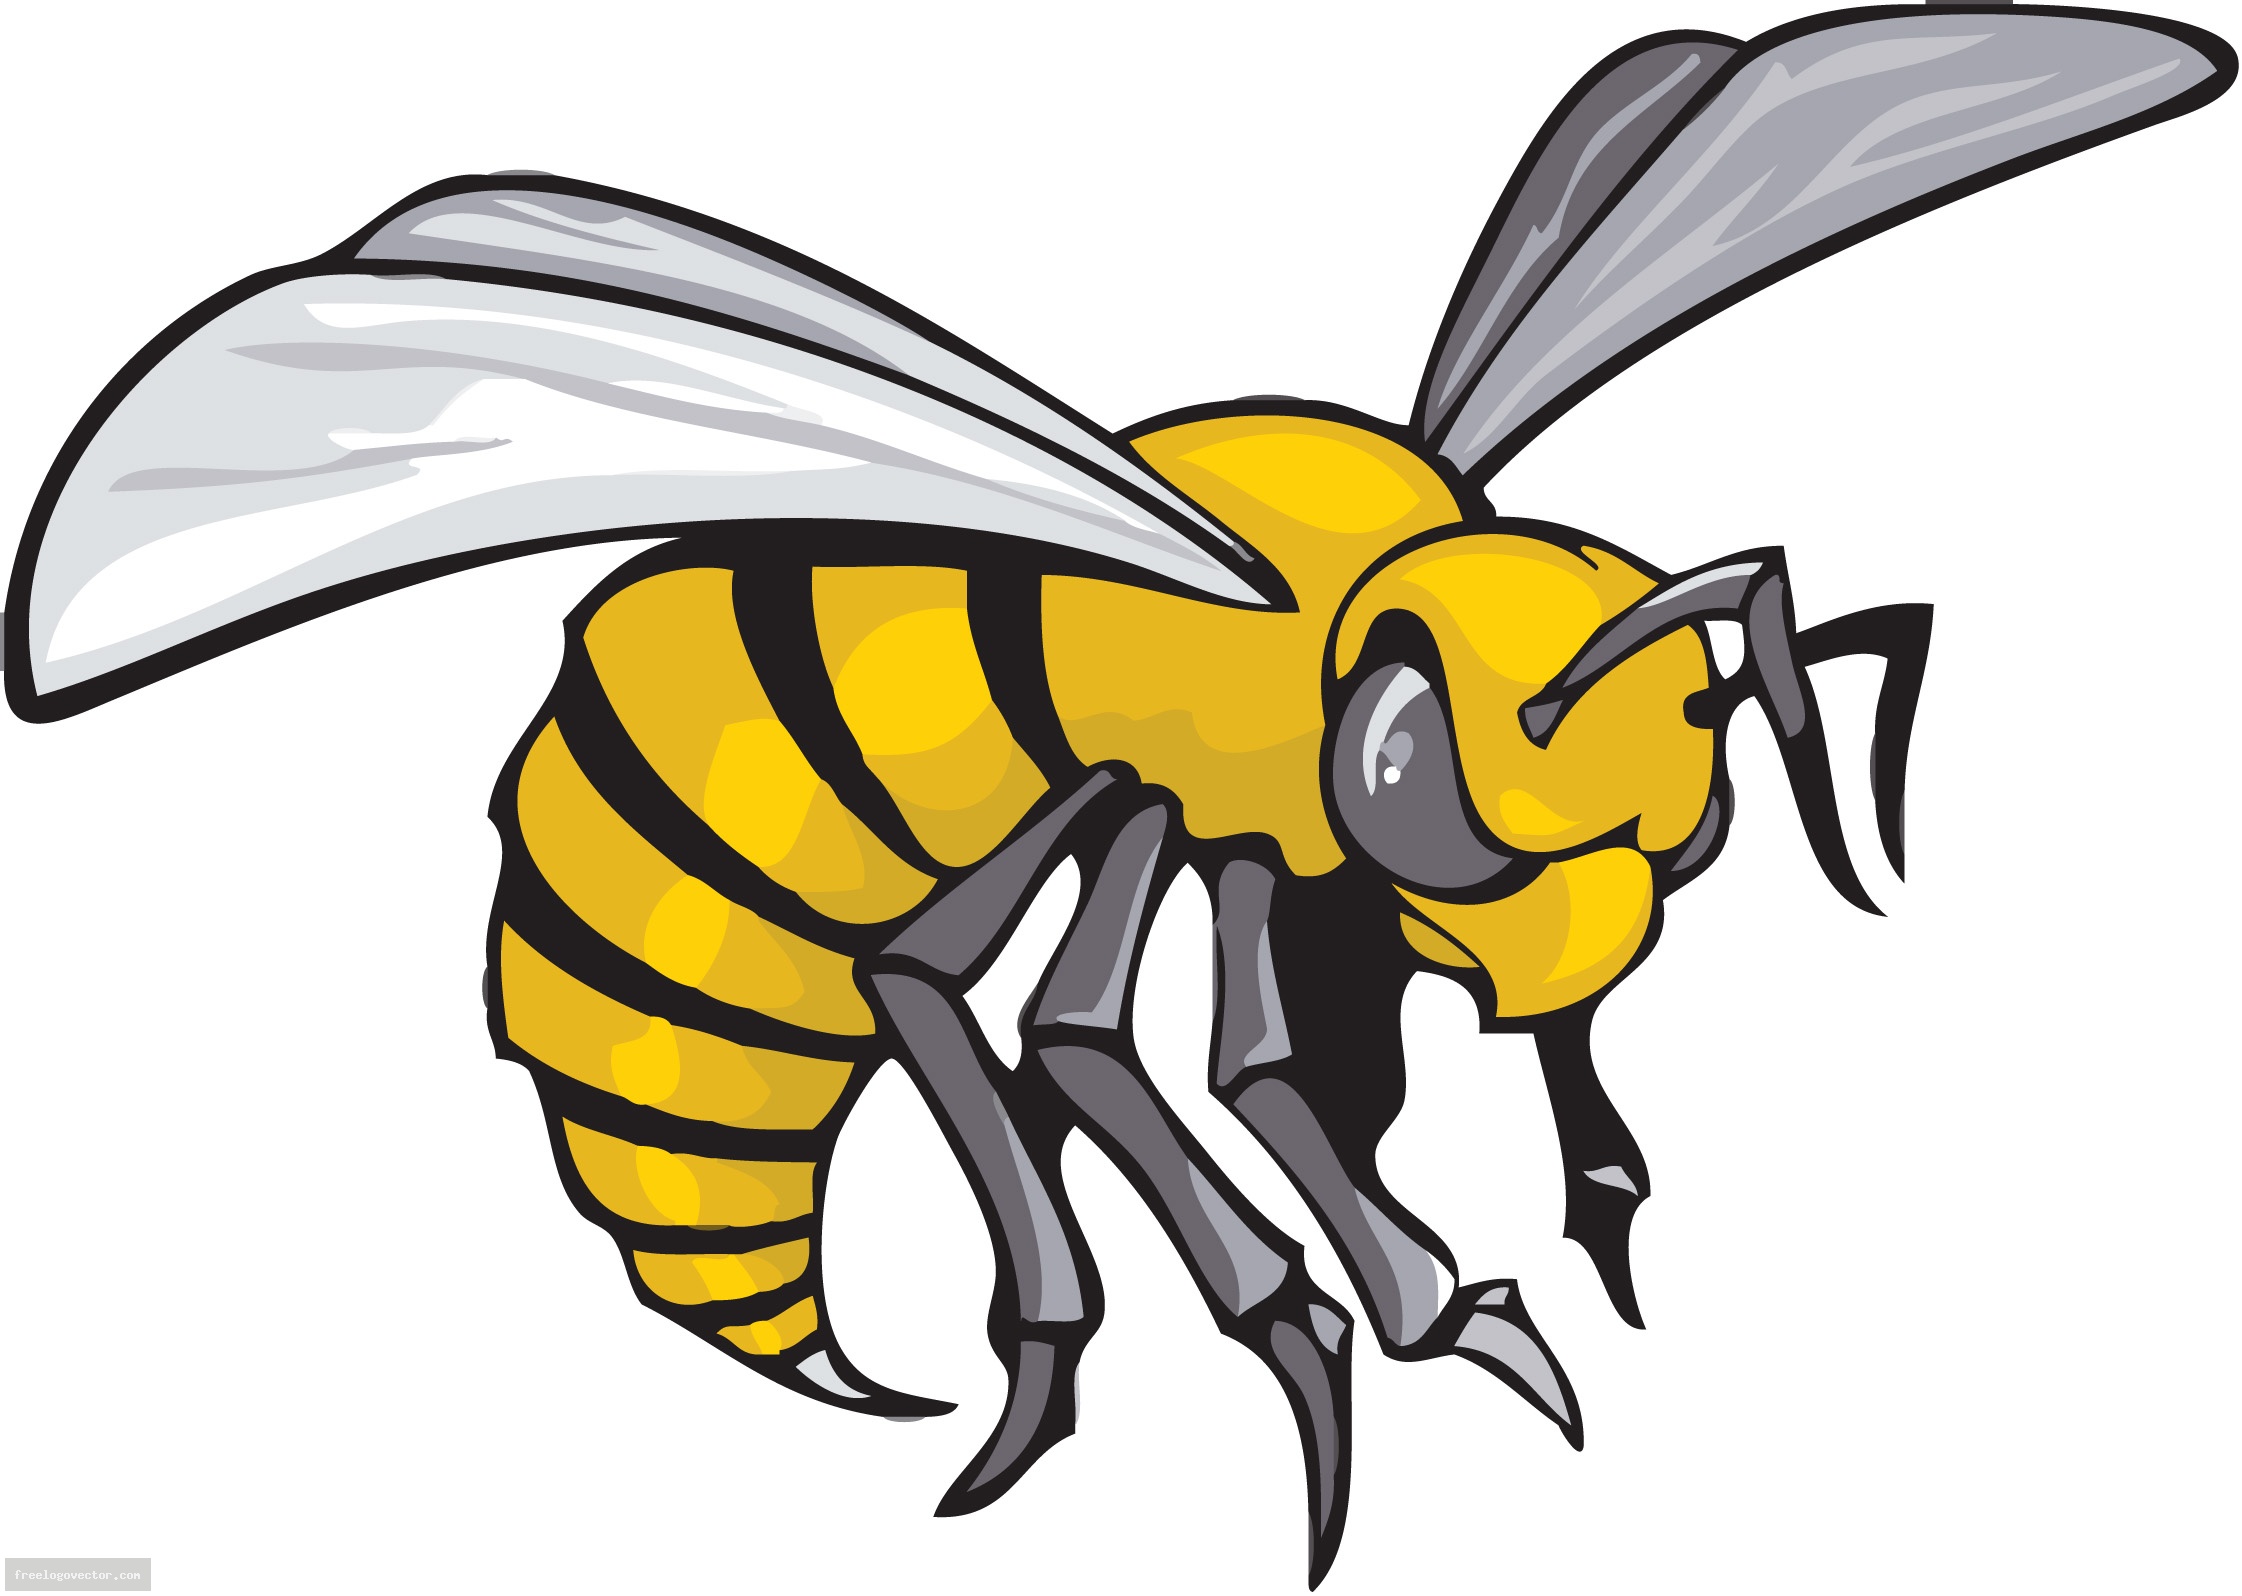 Hornet 20clipart | Clipart library - Free Clipart Images